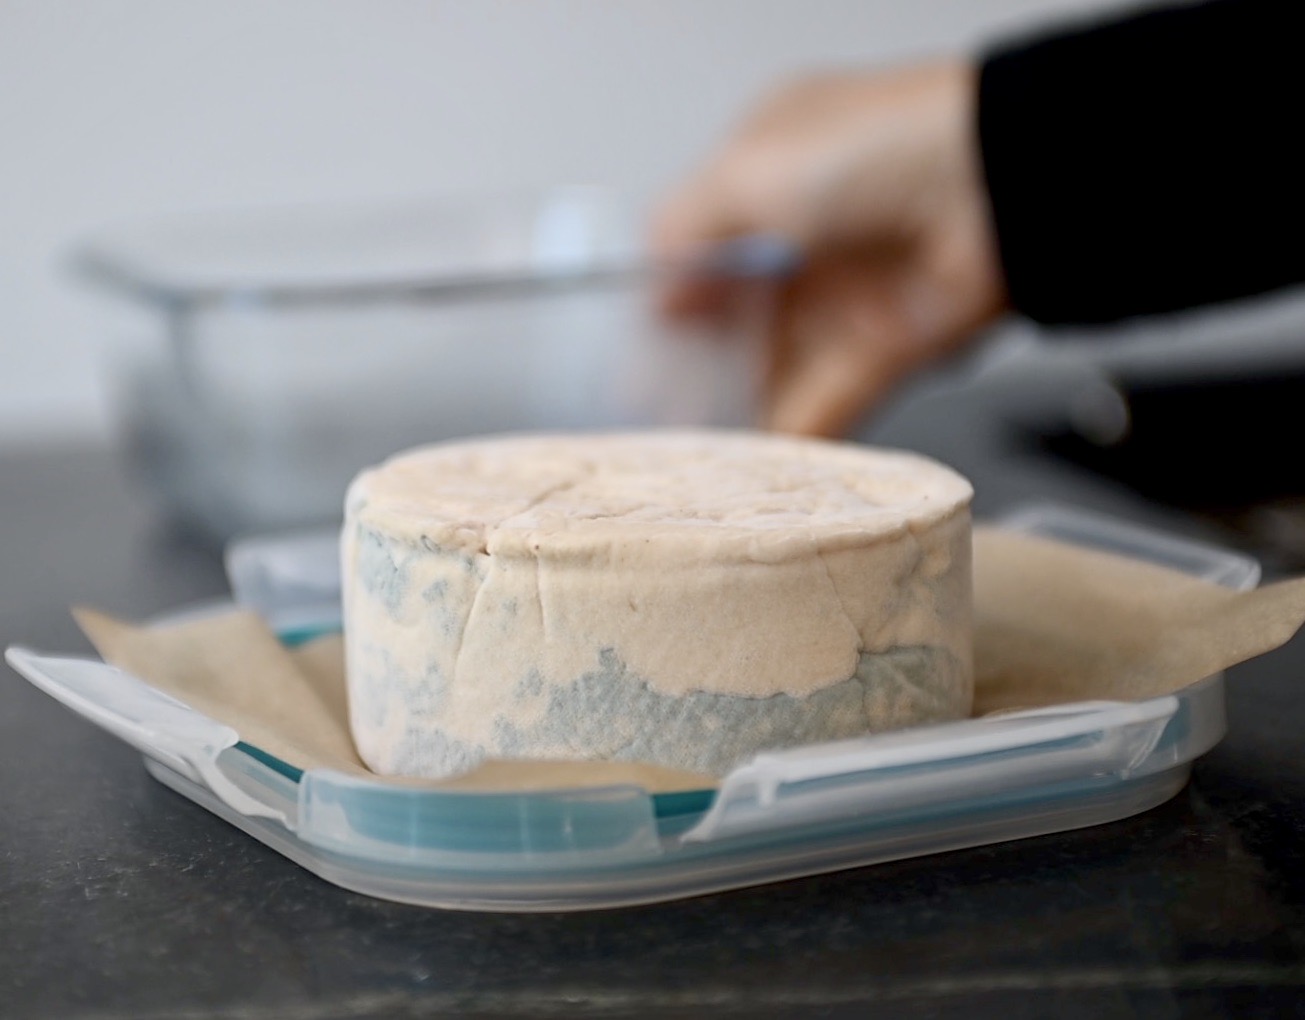 blue mold starts to grow on the cheese